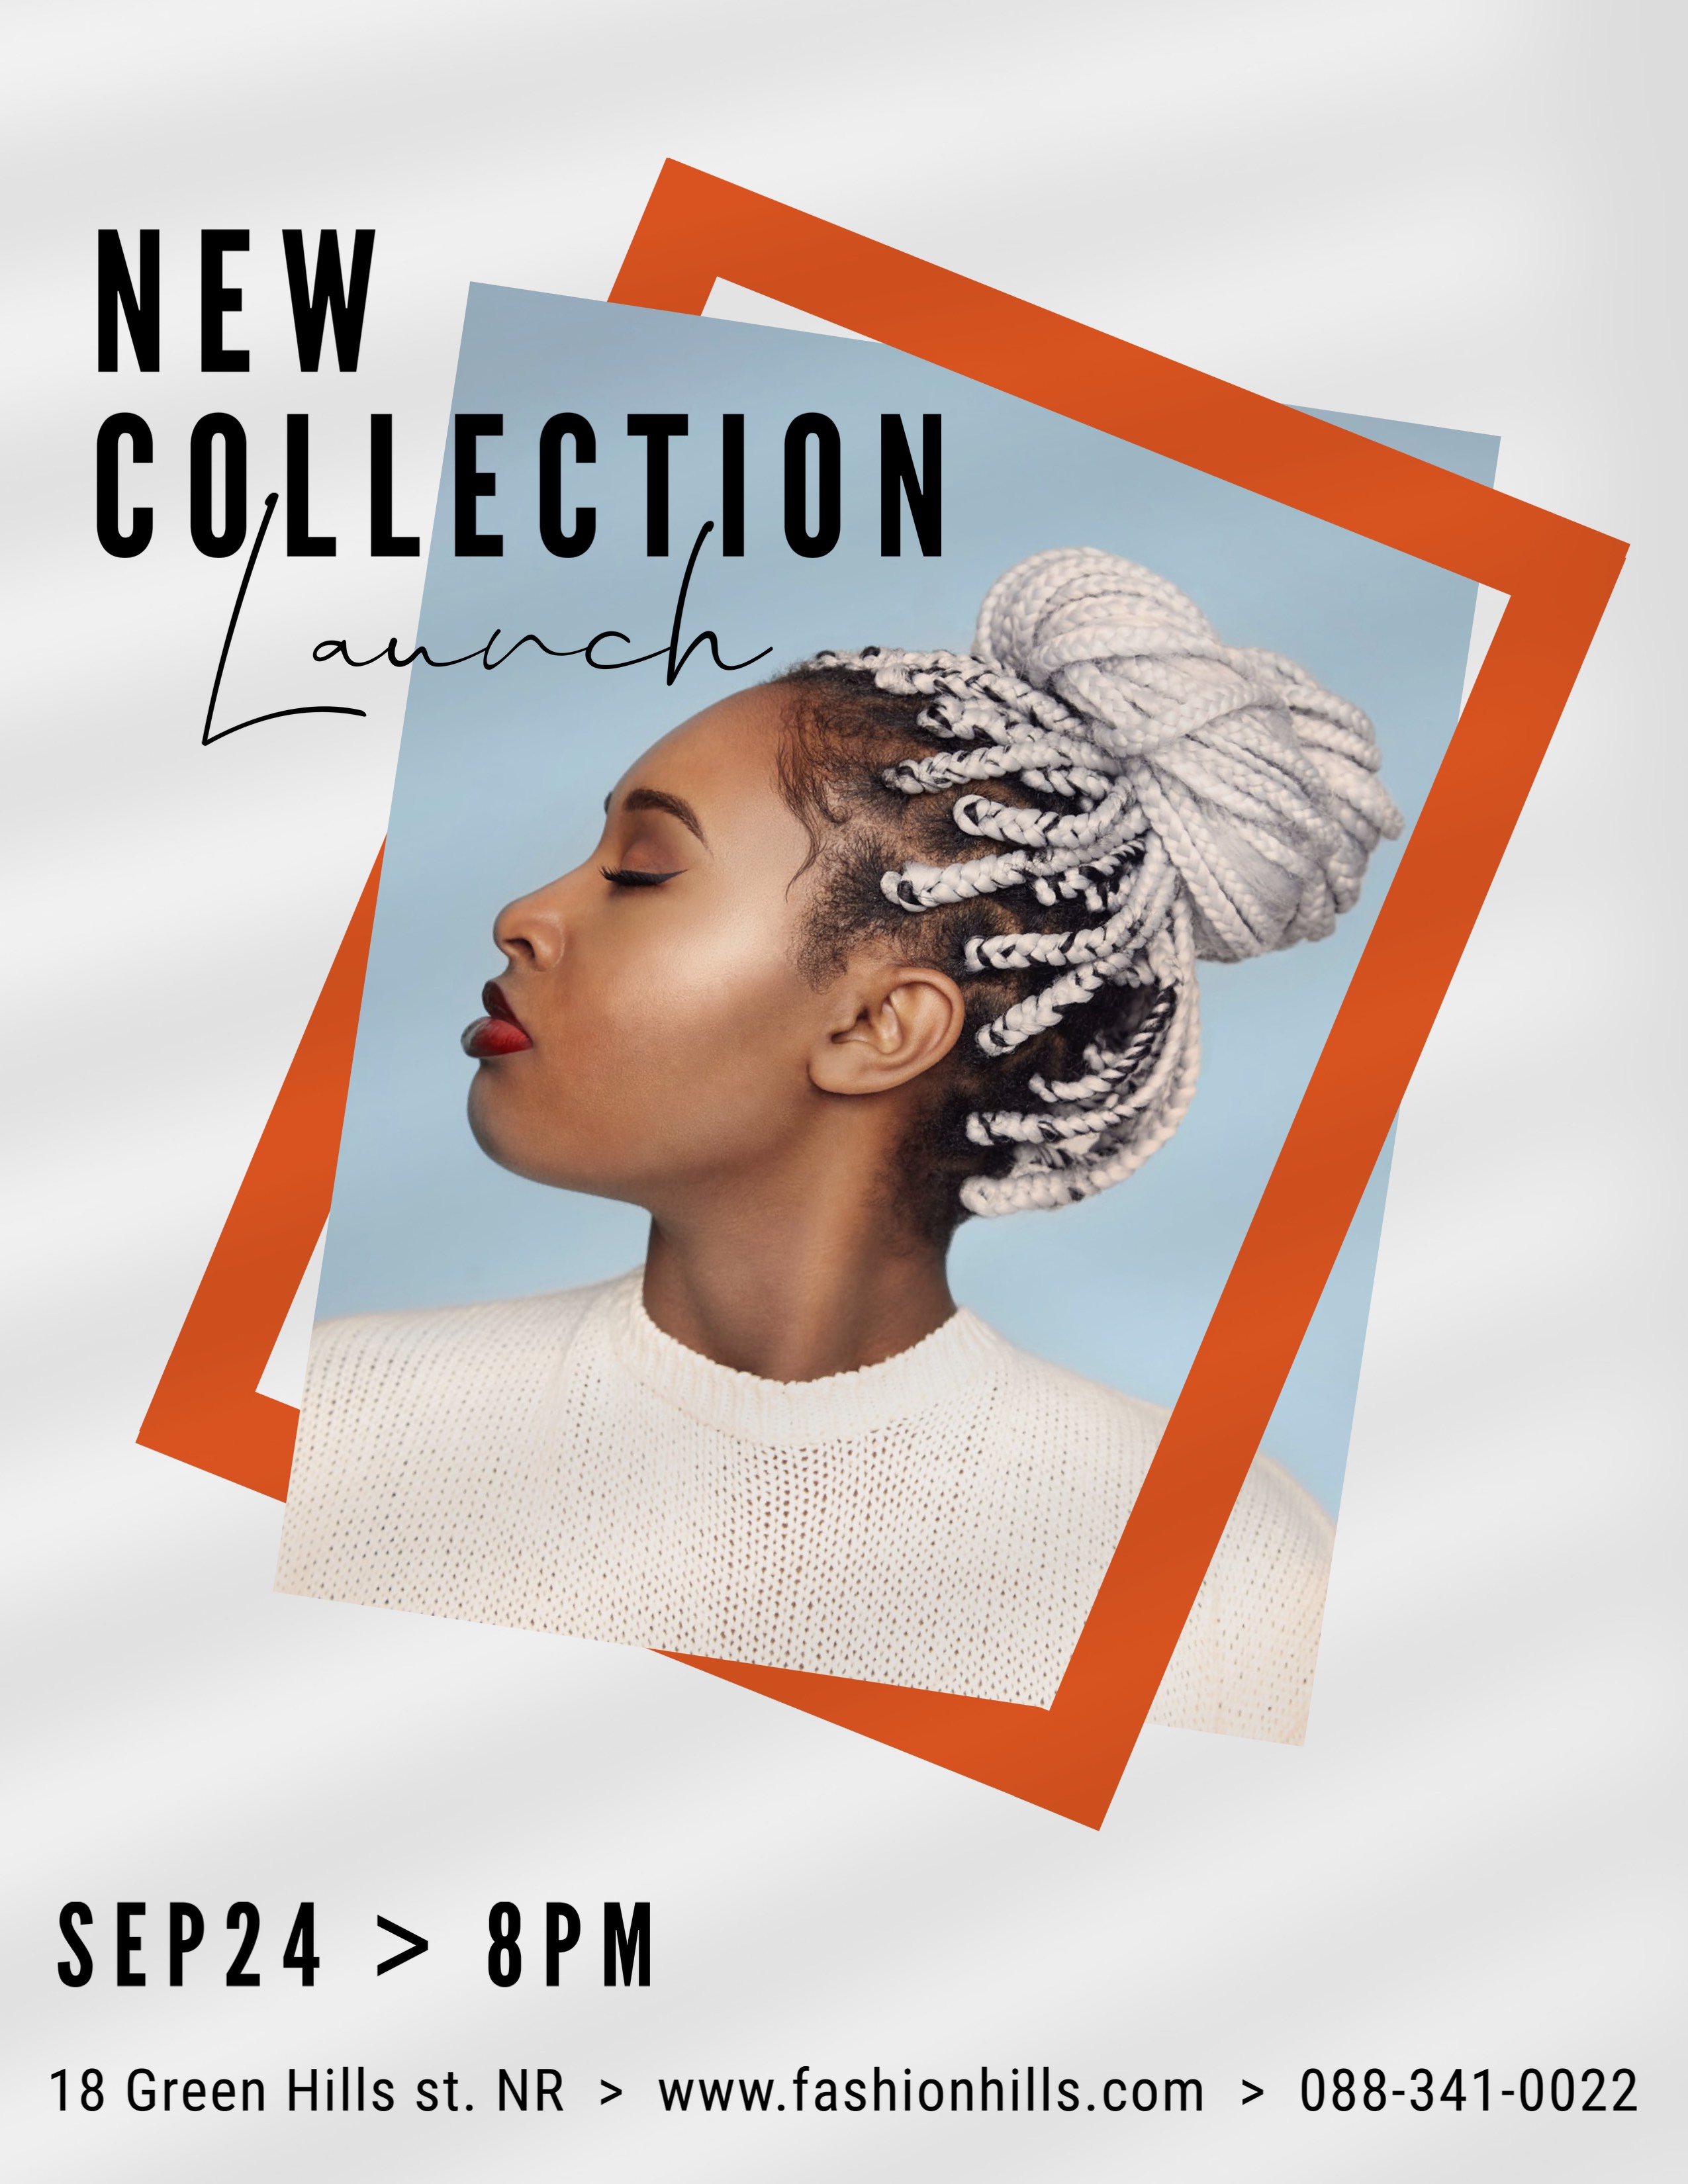 Woman Fashion Shop New Collection Flyer Template 